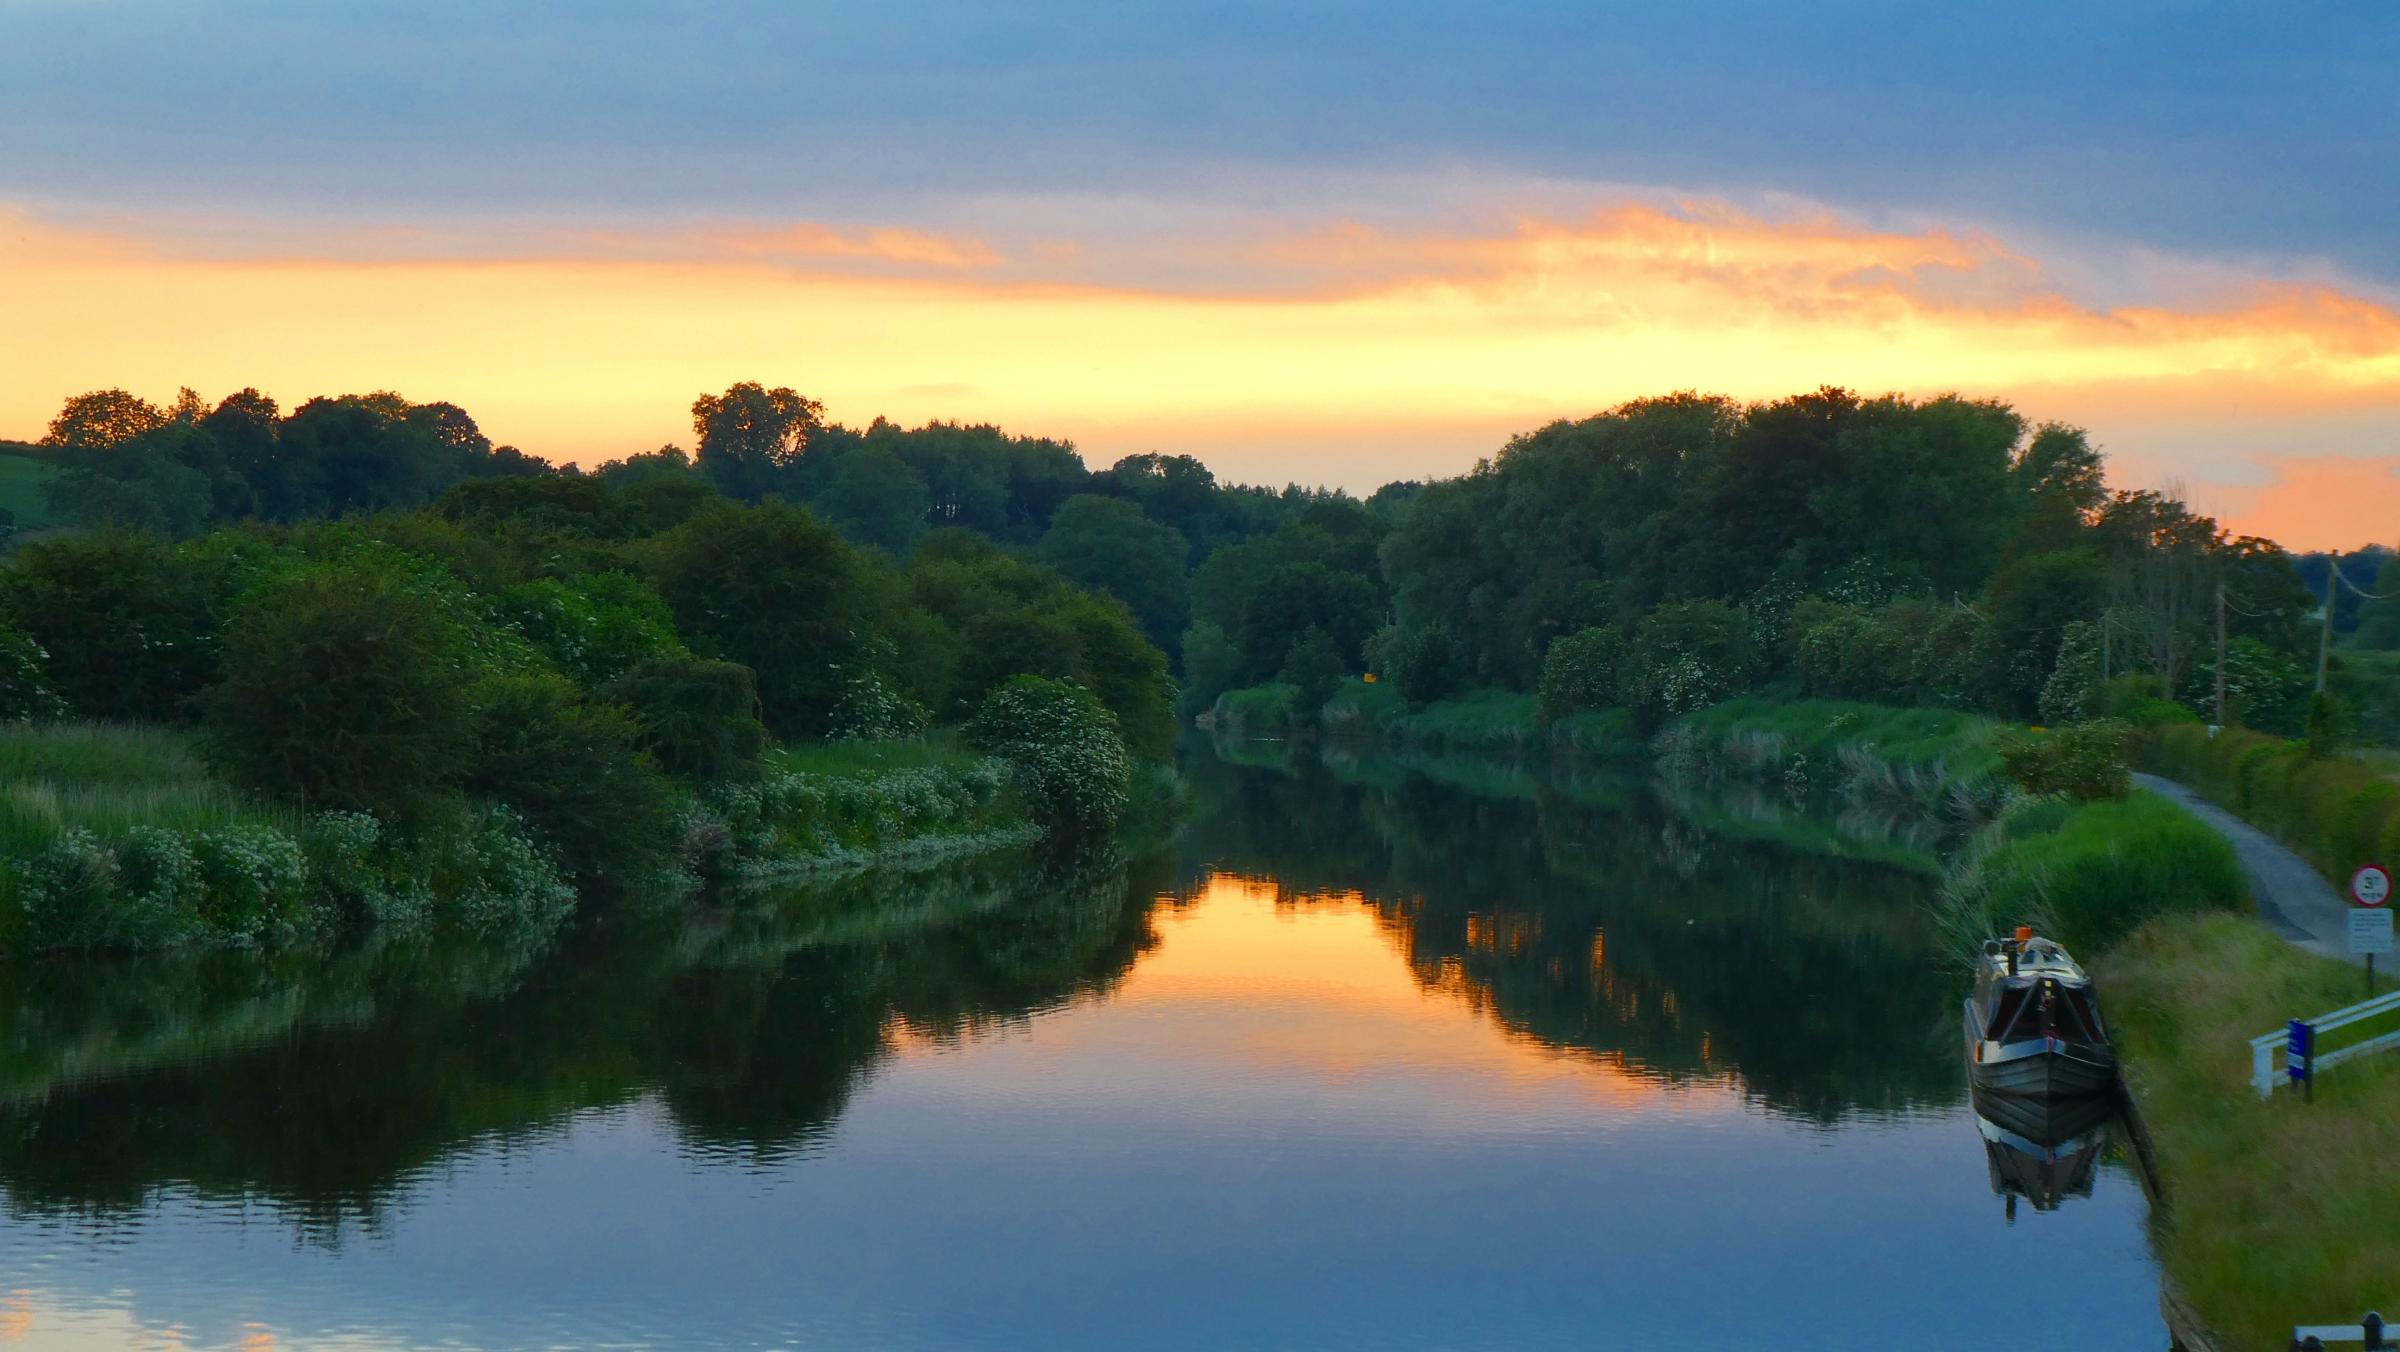 Sunset on the River Weaver at Action Bridge